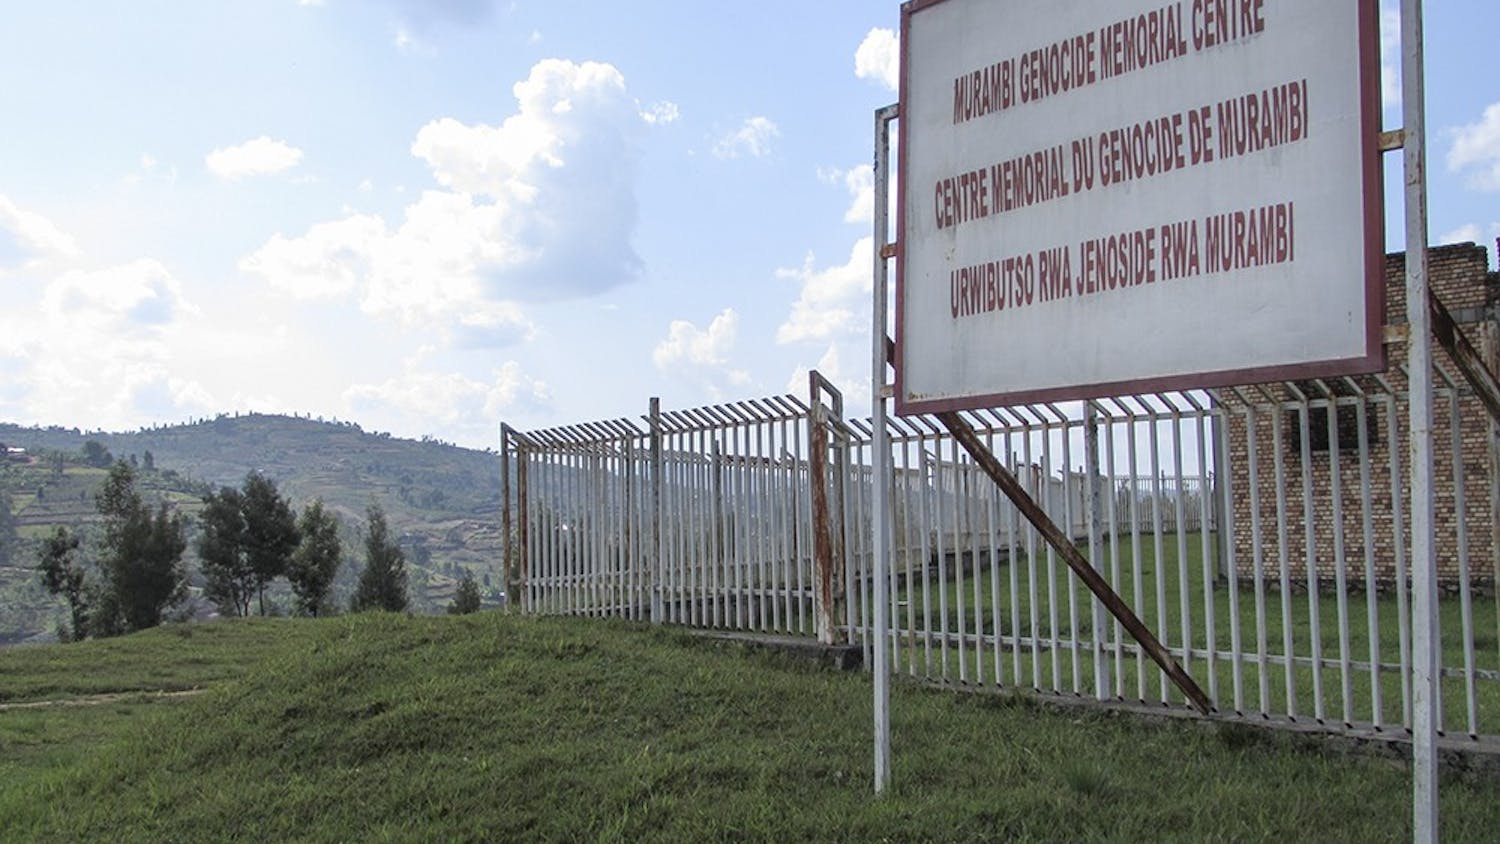 The Murambi Genocide Memorial Centre in the Murambi district in southern Rwanda has small buildings where preserved bodies of genocide victims are controversially displayed, encased in lime after being exhumed from mass graves.